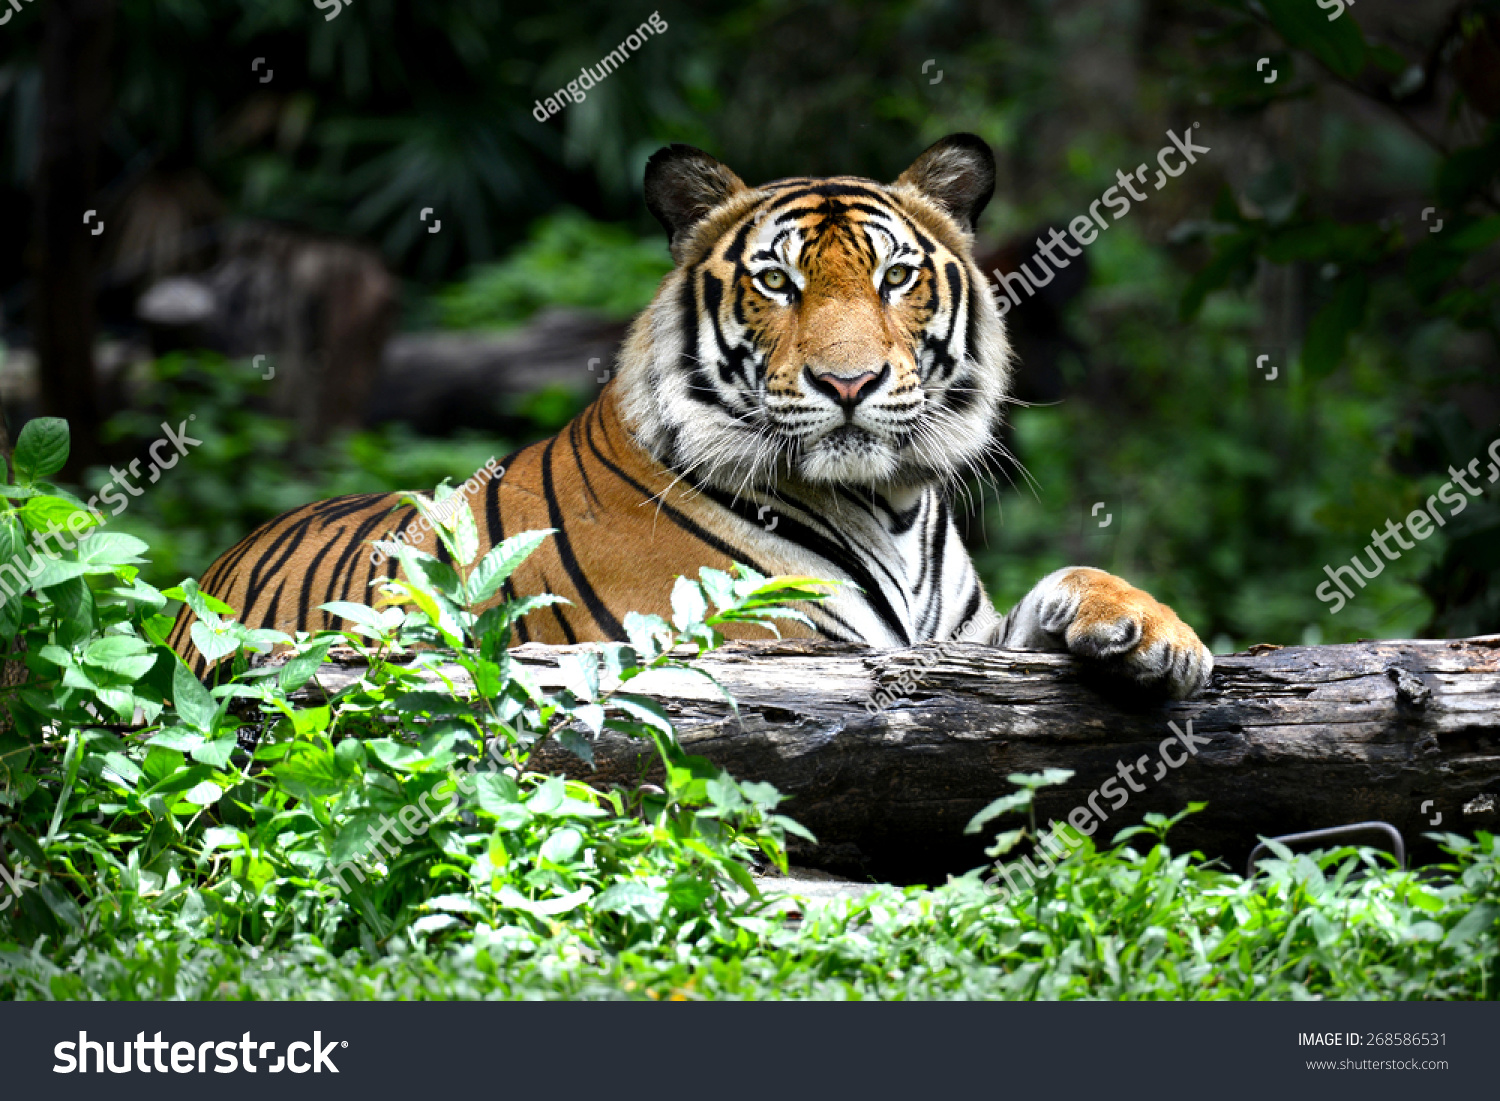 Bengal Tiger in forest show head and leg #268586531